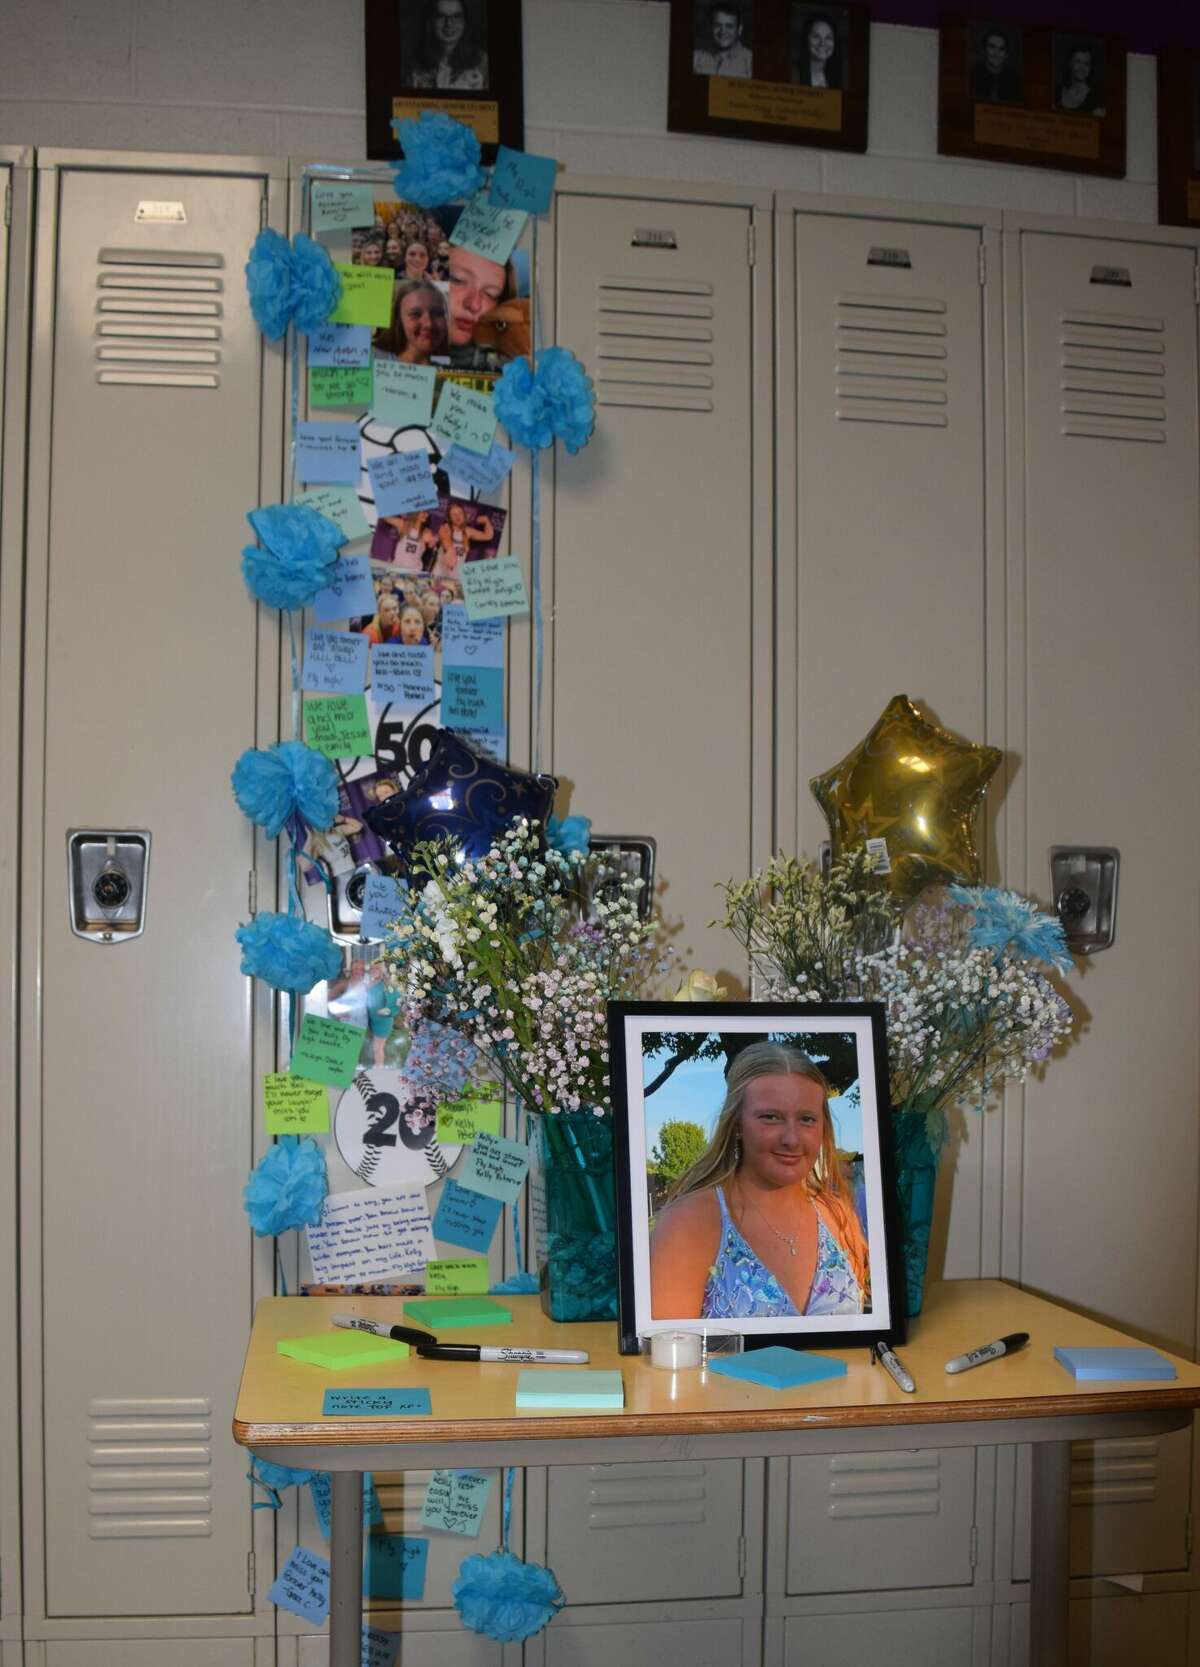 Routt Catholic High School students have left their parting words to junior Kelly Peters, who died Saturday, at a memorial at her locker.